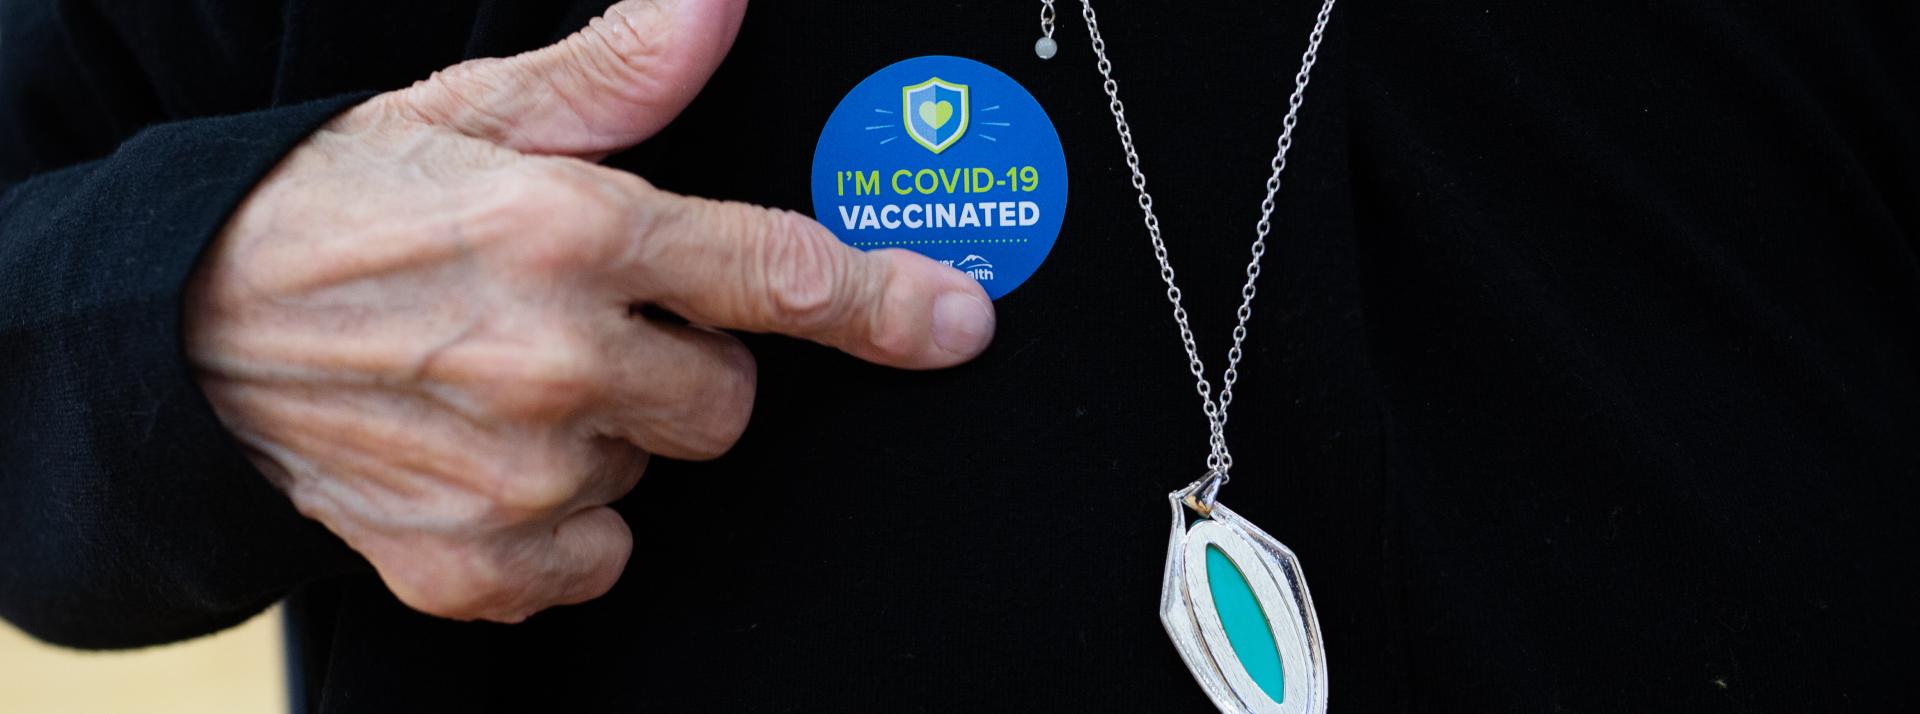 person pointing to COVID-19 vaccine sticker